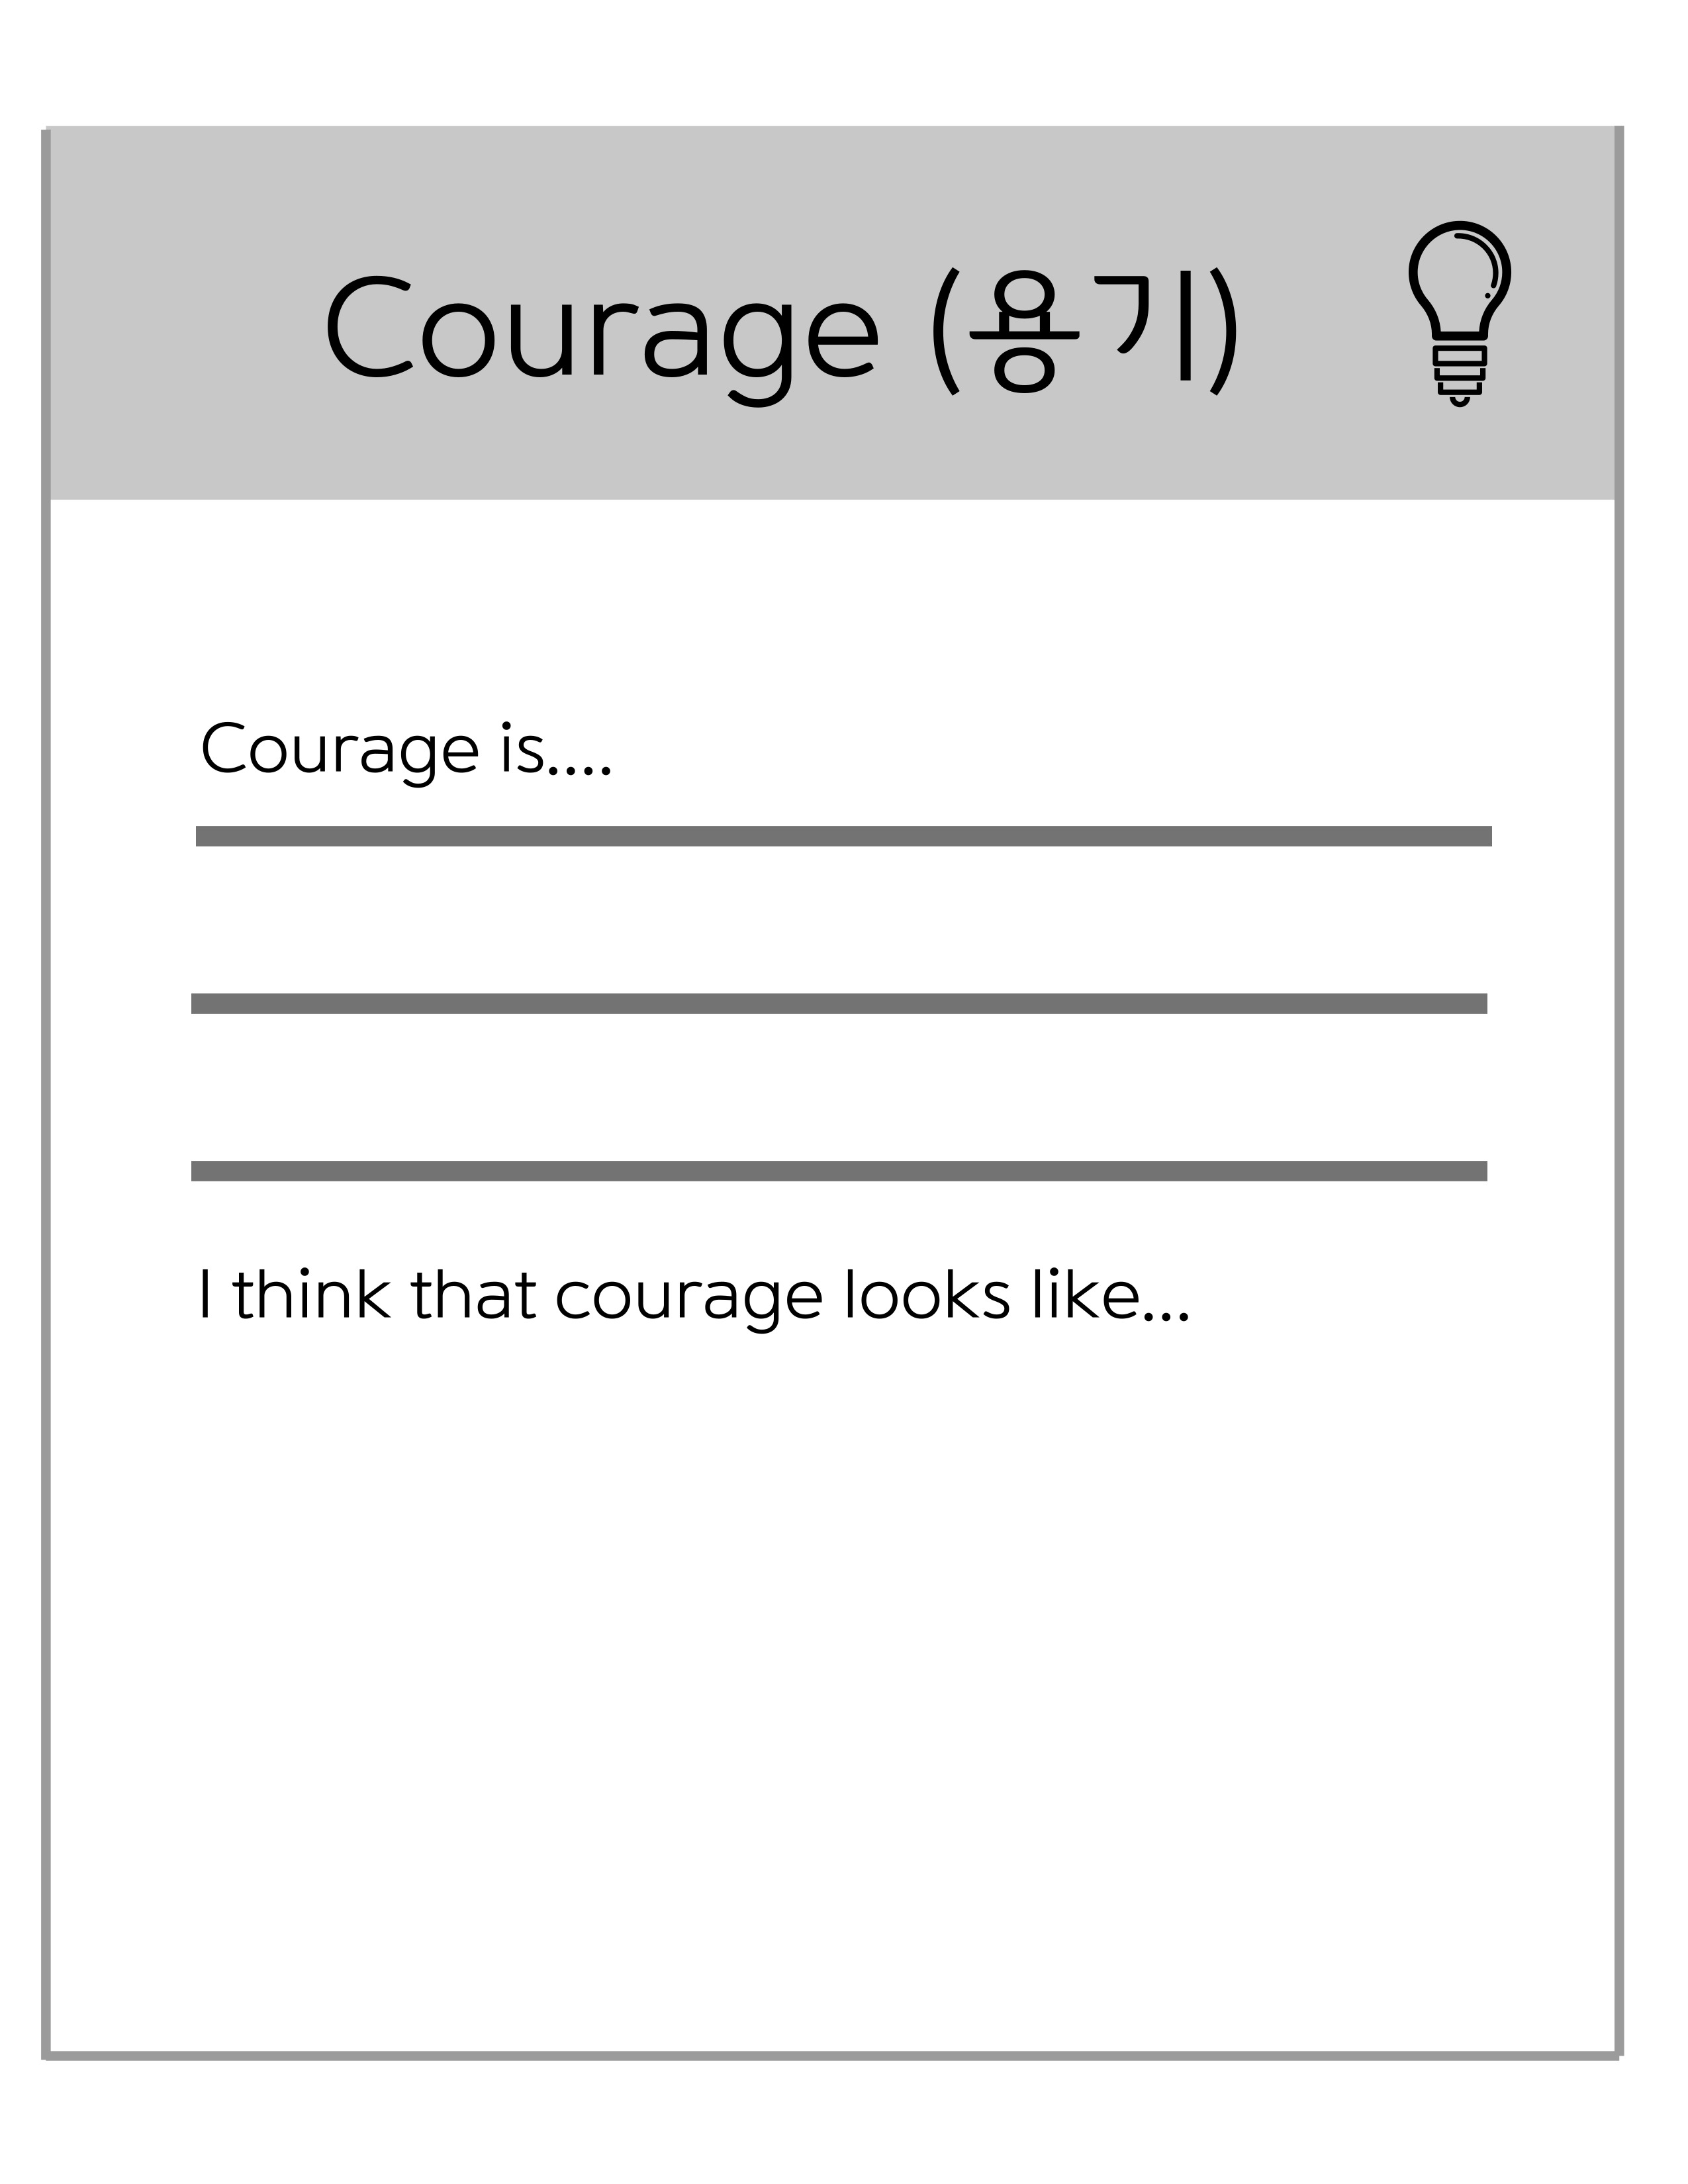 3. What is Courage_.jpg